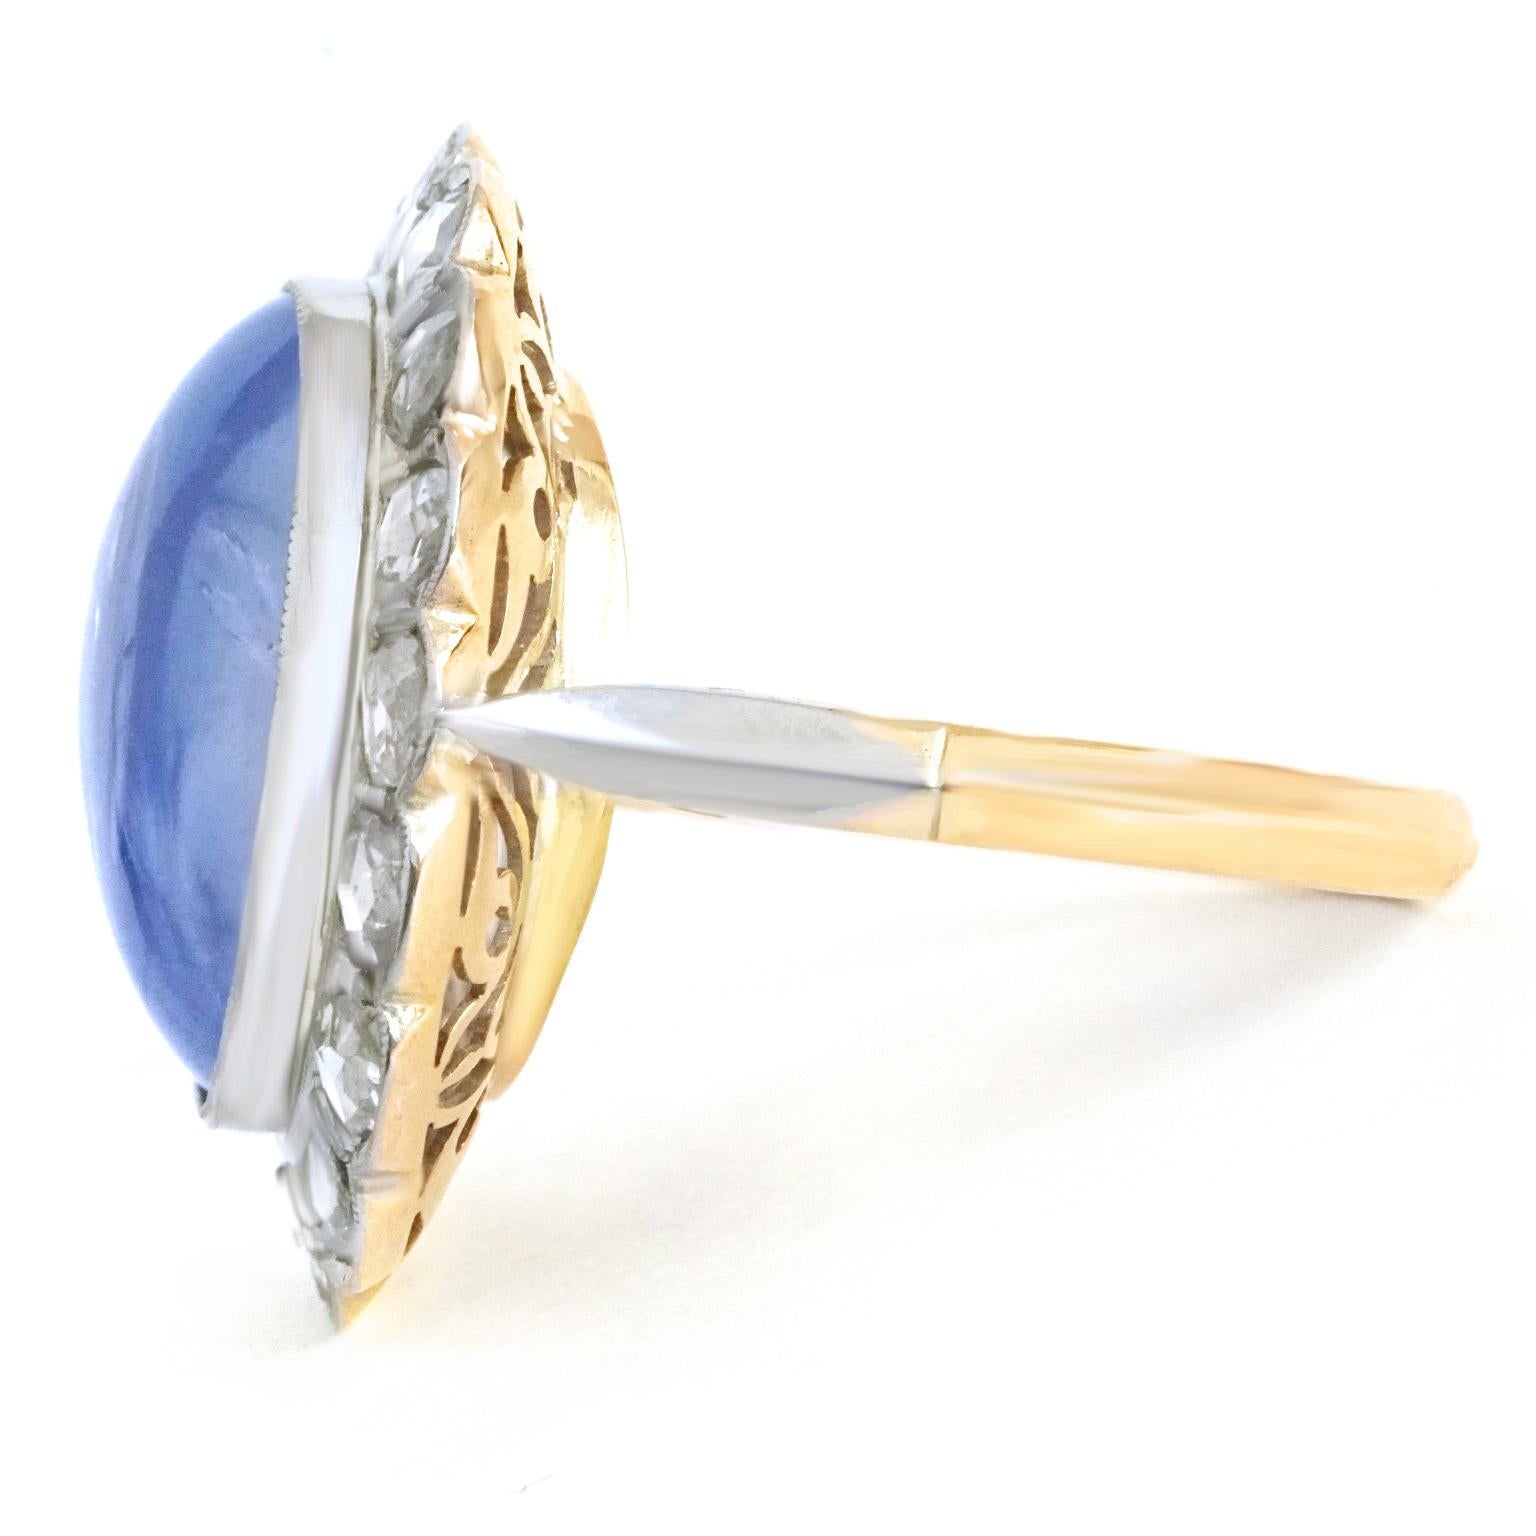 Women's Art Deco Gold and Platinum Ring set with a 11.92ct No Heat Ceylon Sapphire AGL 